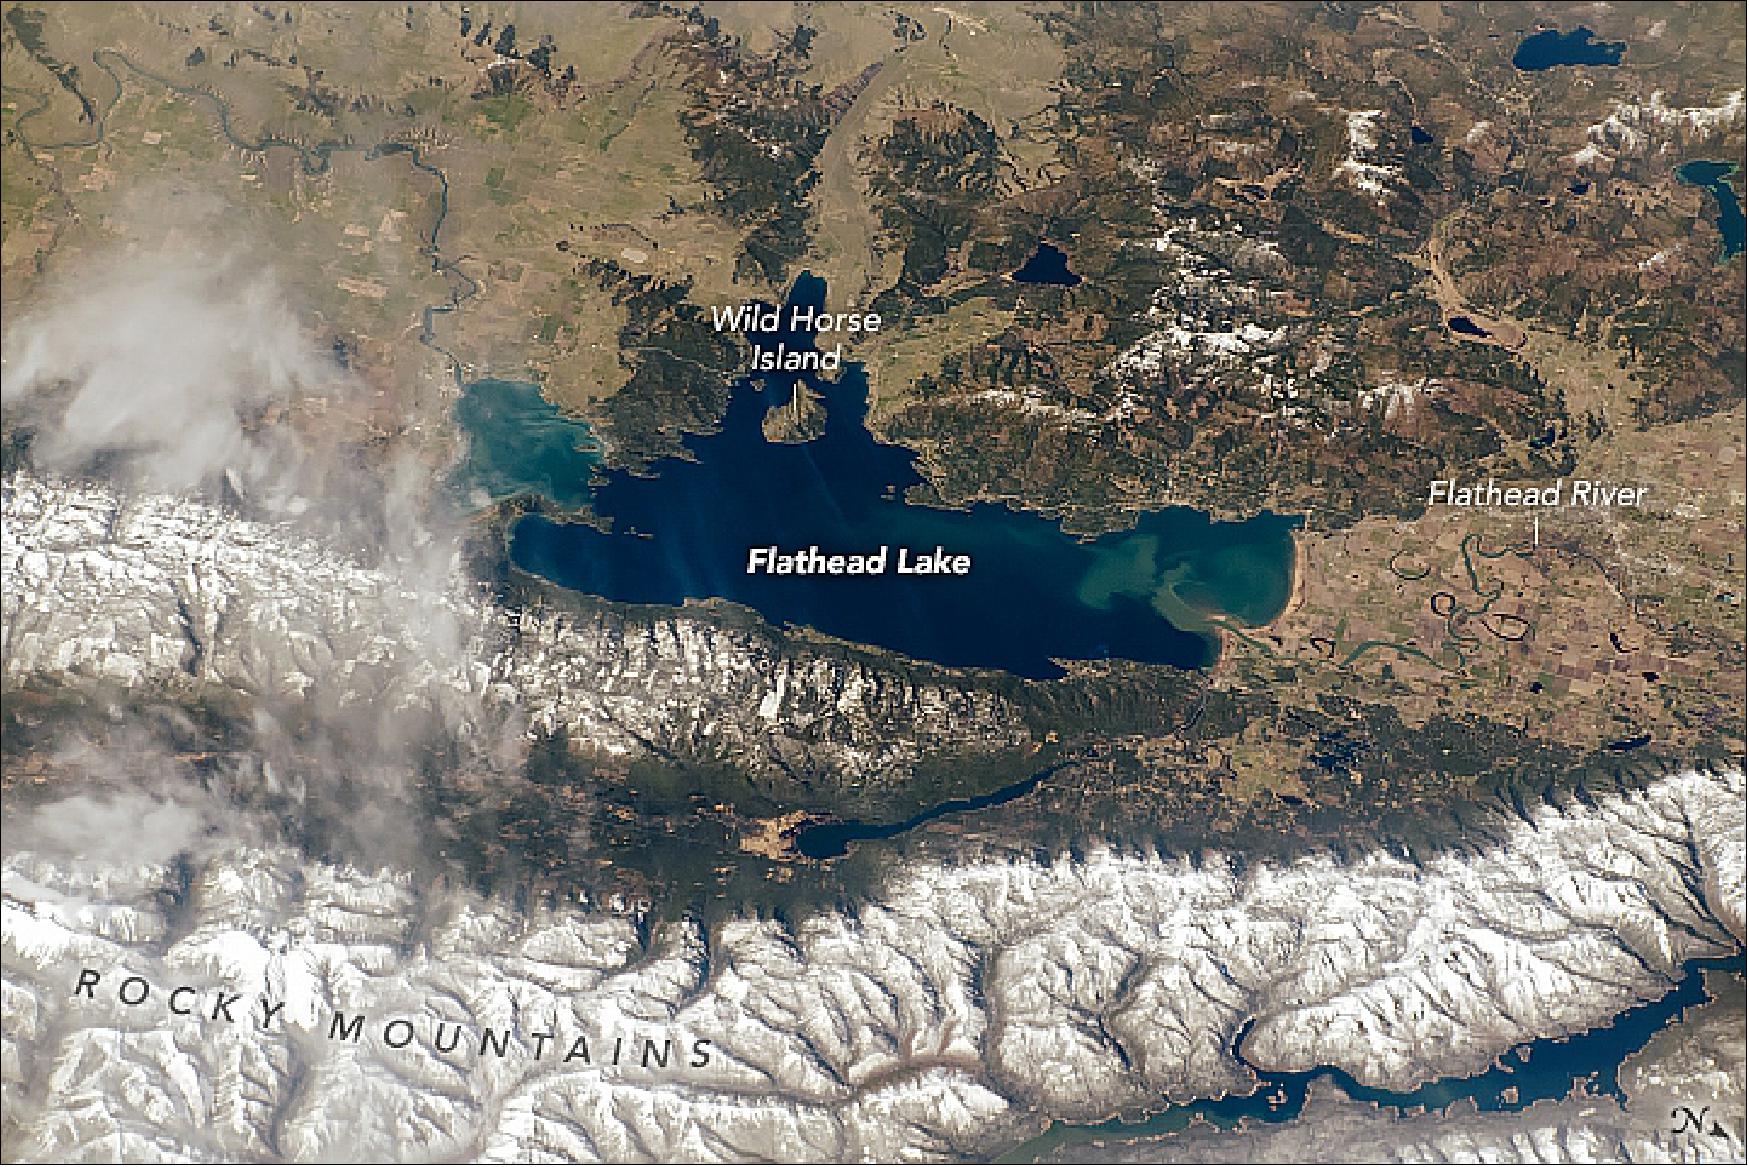 Figure 93: Flathead is located within a depression known as the Rocky Mountain Trench, and it is one of the largest freshwater lakes west of the Mississippi River in the continental United States. The lighter-toned parts of the lake are due to the inflow of sediment from seasonal snow melt. The meandering Flathead River, which flows south into the lake, has created multiple sloughs (also known as oxbows) along its course (image credit: Astronaut photograph ISS059-E-36857 was acquired on April 29, 2019, with a Nikon D5 digital camera using a 240 mm lens and is provided by the ISS Crew Earth Observations Facility and the Earth Science and Remote Sensing Unit, Johnson Space Center. The image was taken by a member of the Expedition 59 crew)